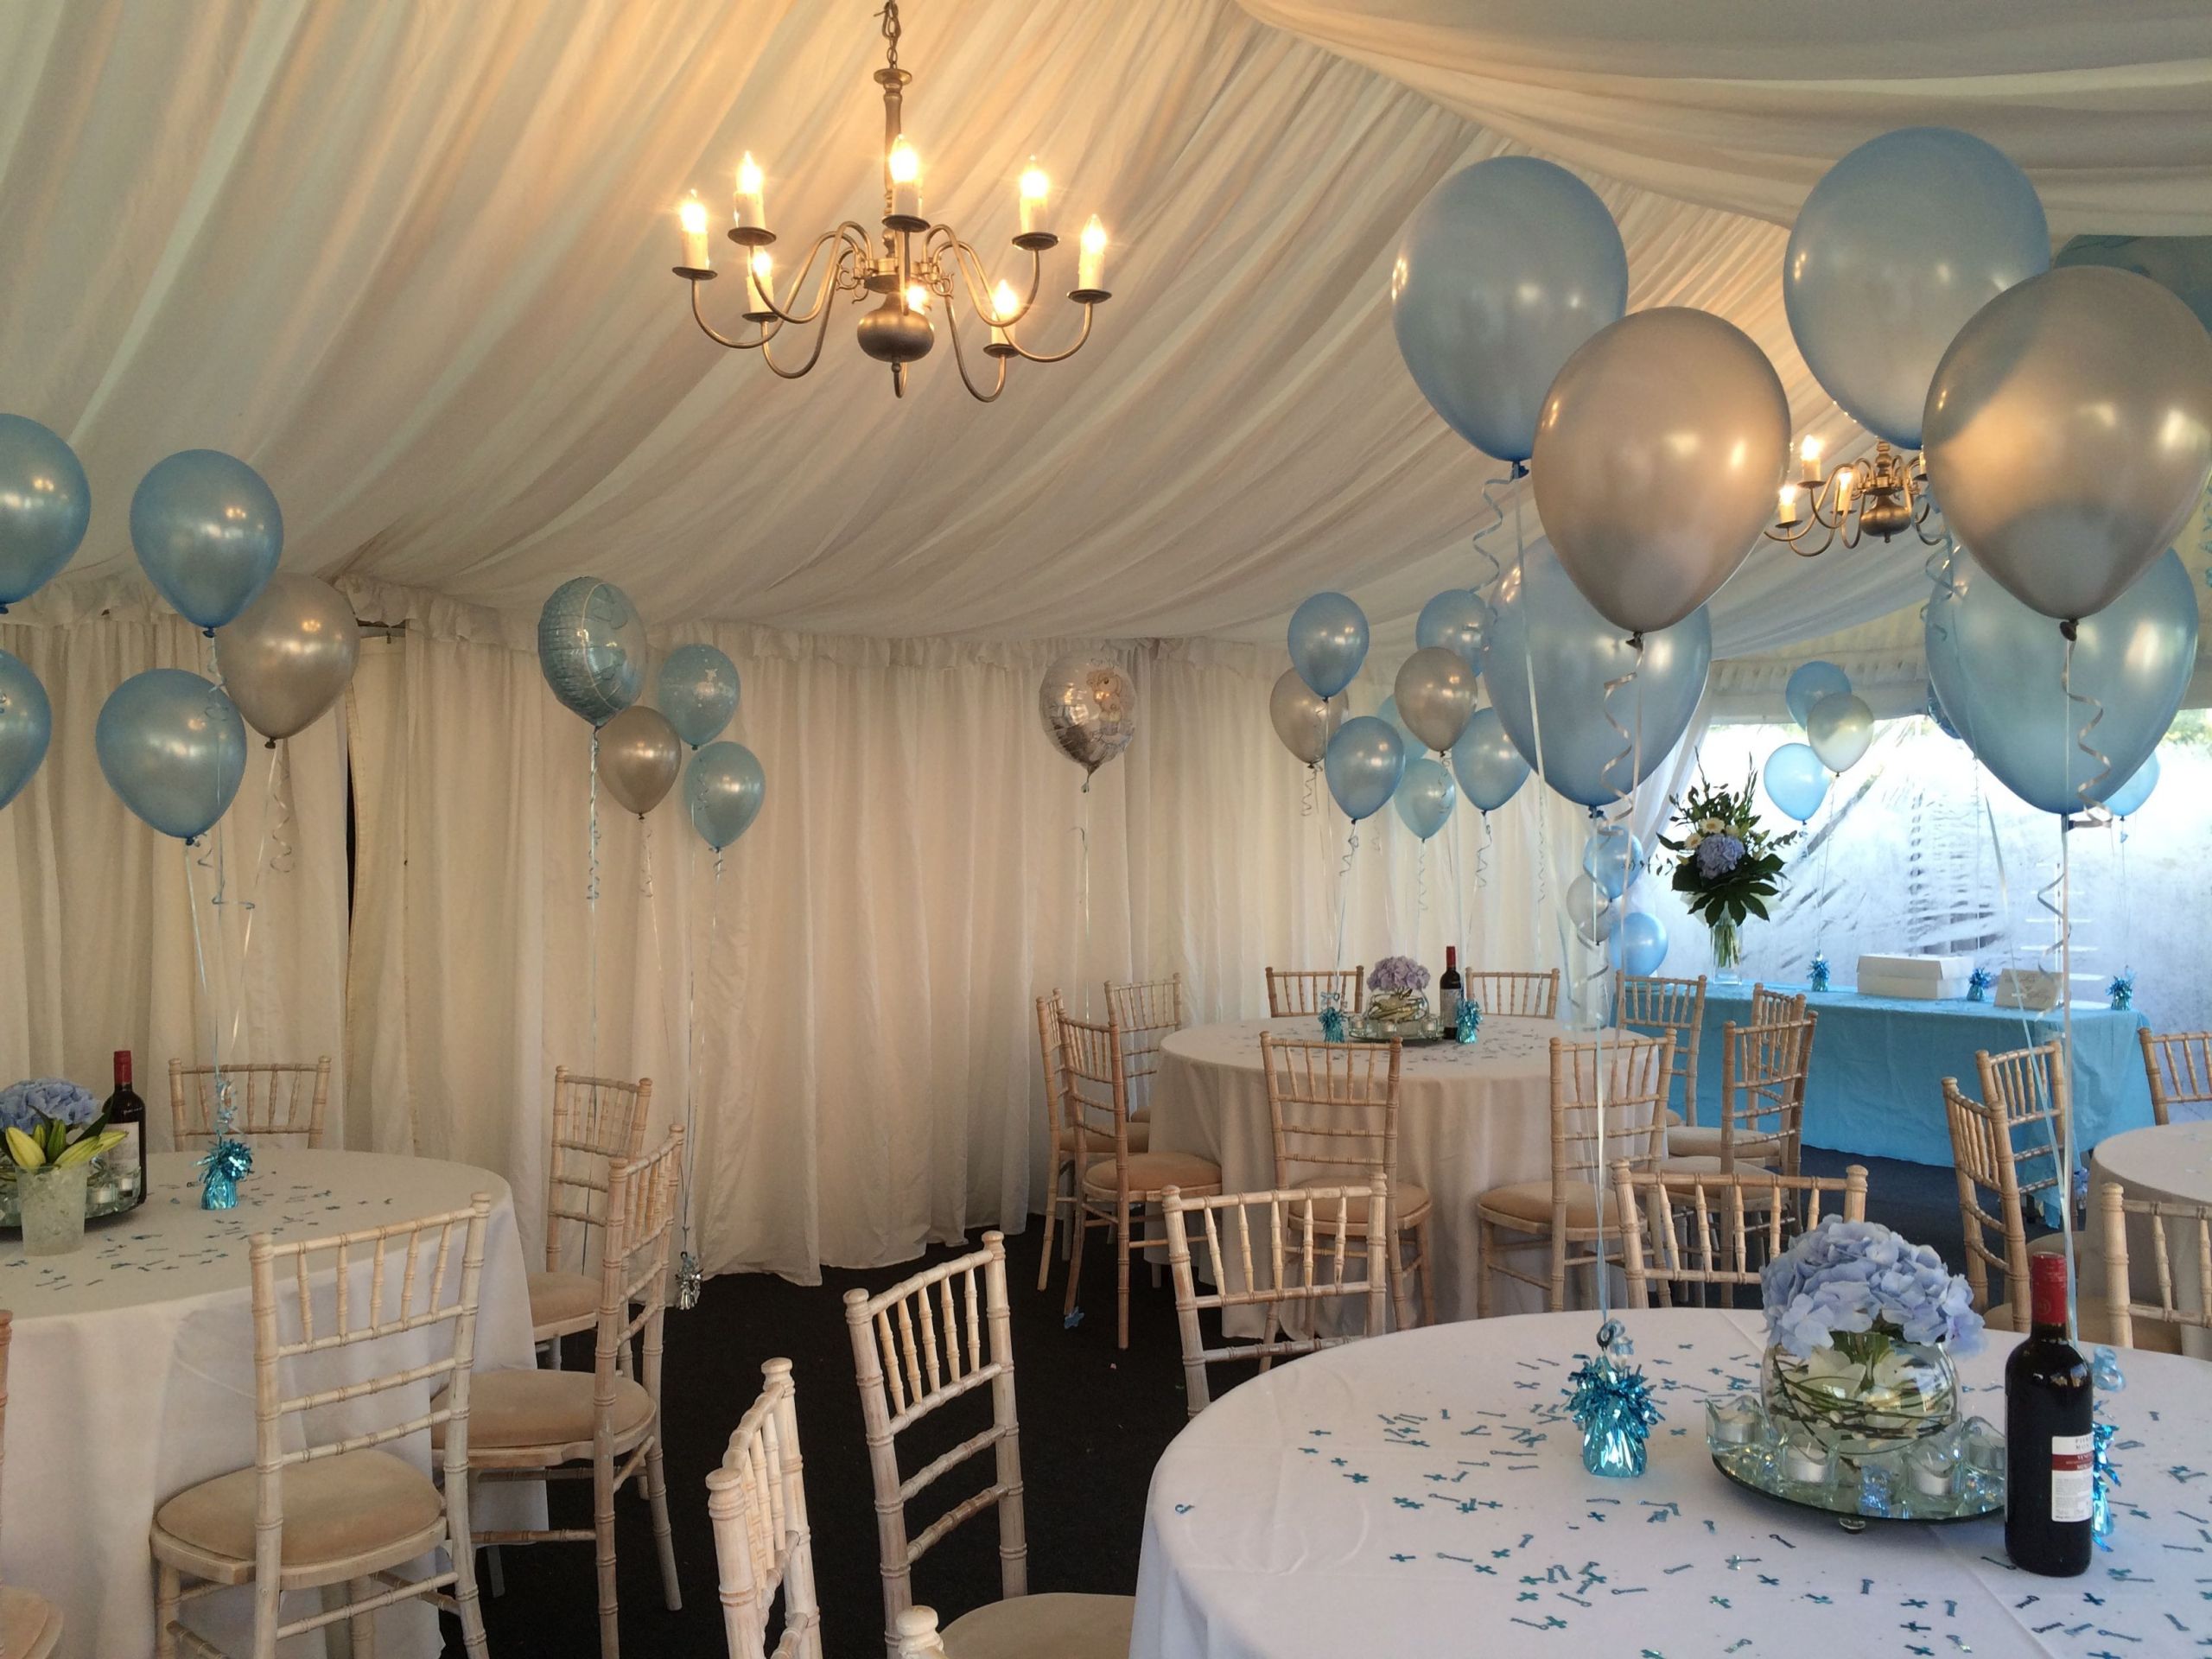 Baby Boy Baptism Decoration Ideas
 plementary floor and table balloon decorations all